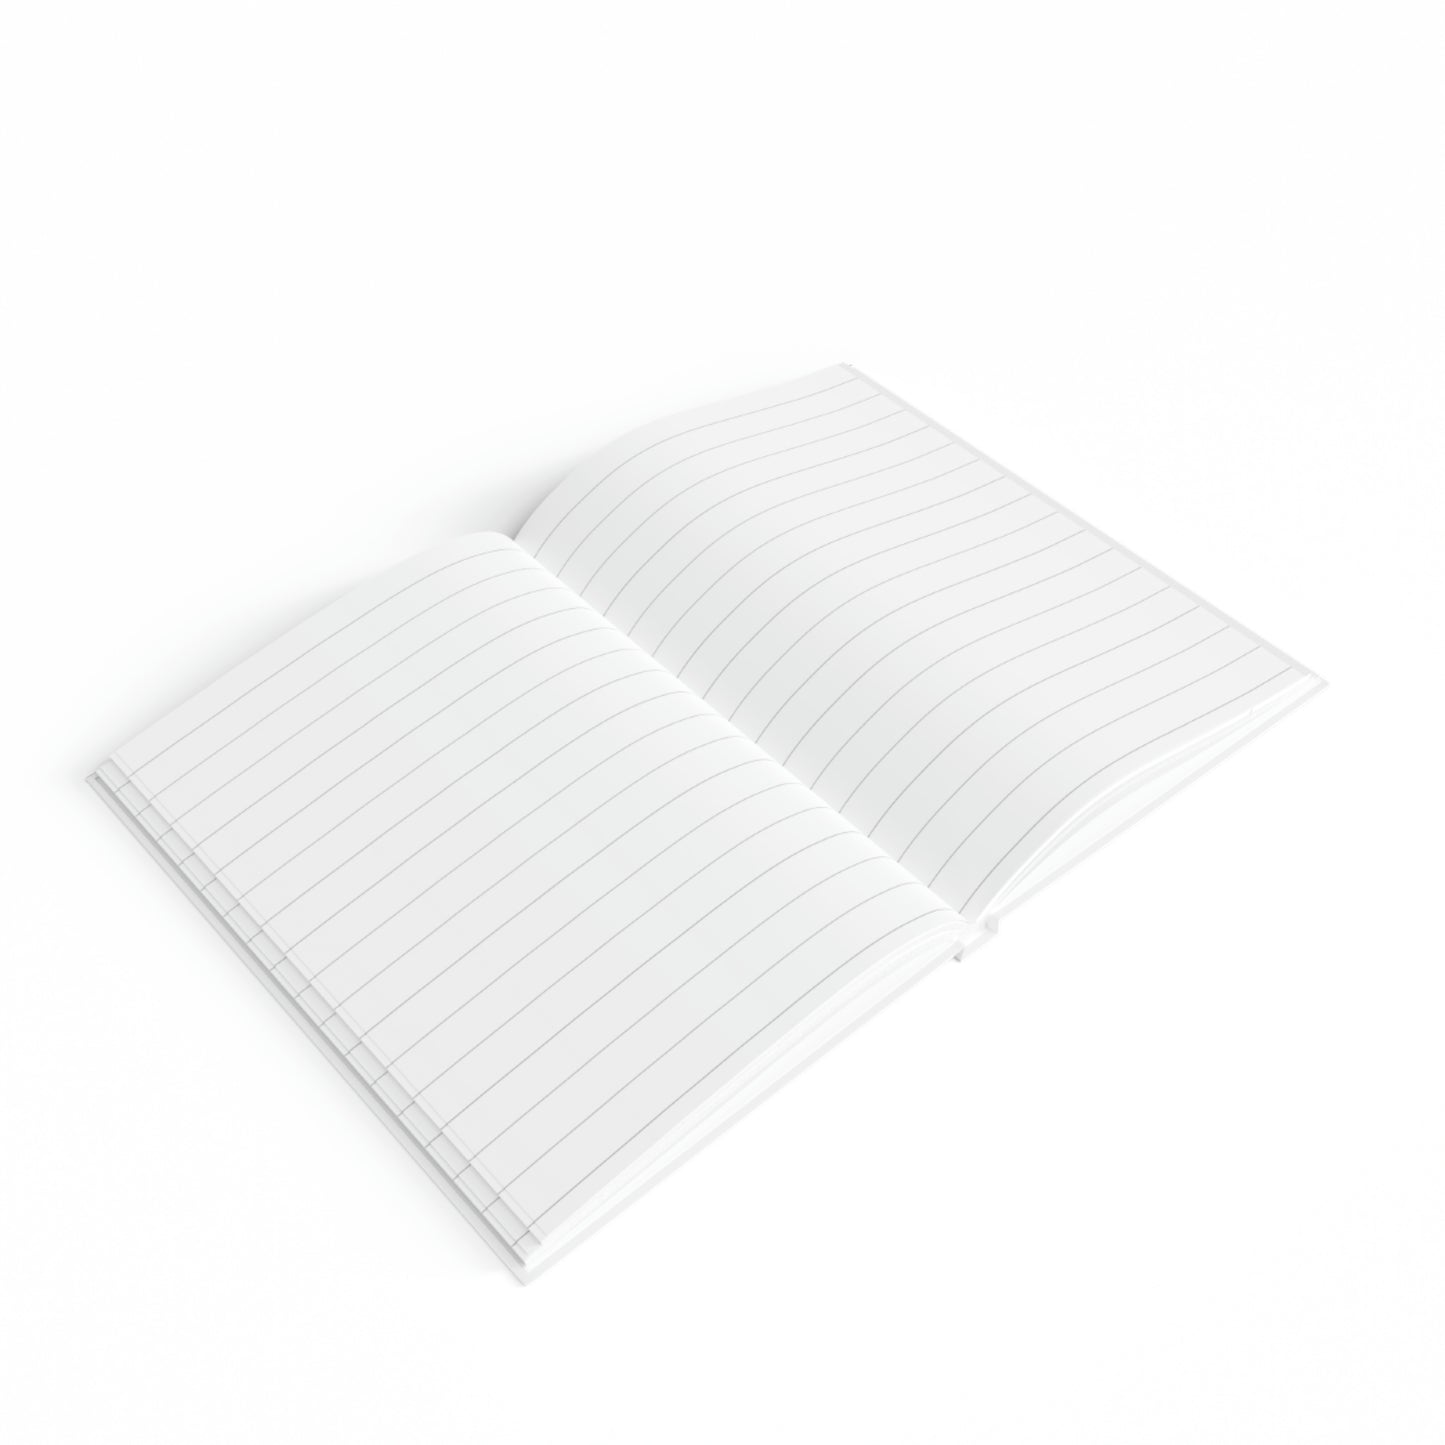 Sacred Geometry - Journal - Ruled Line - White Cover